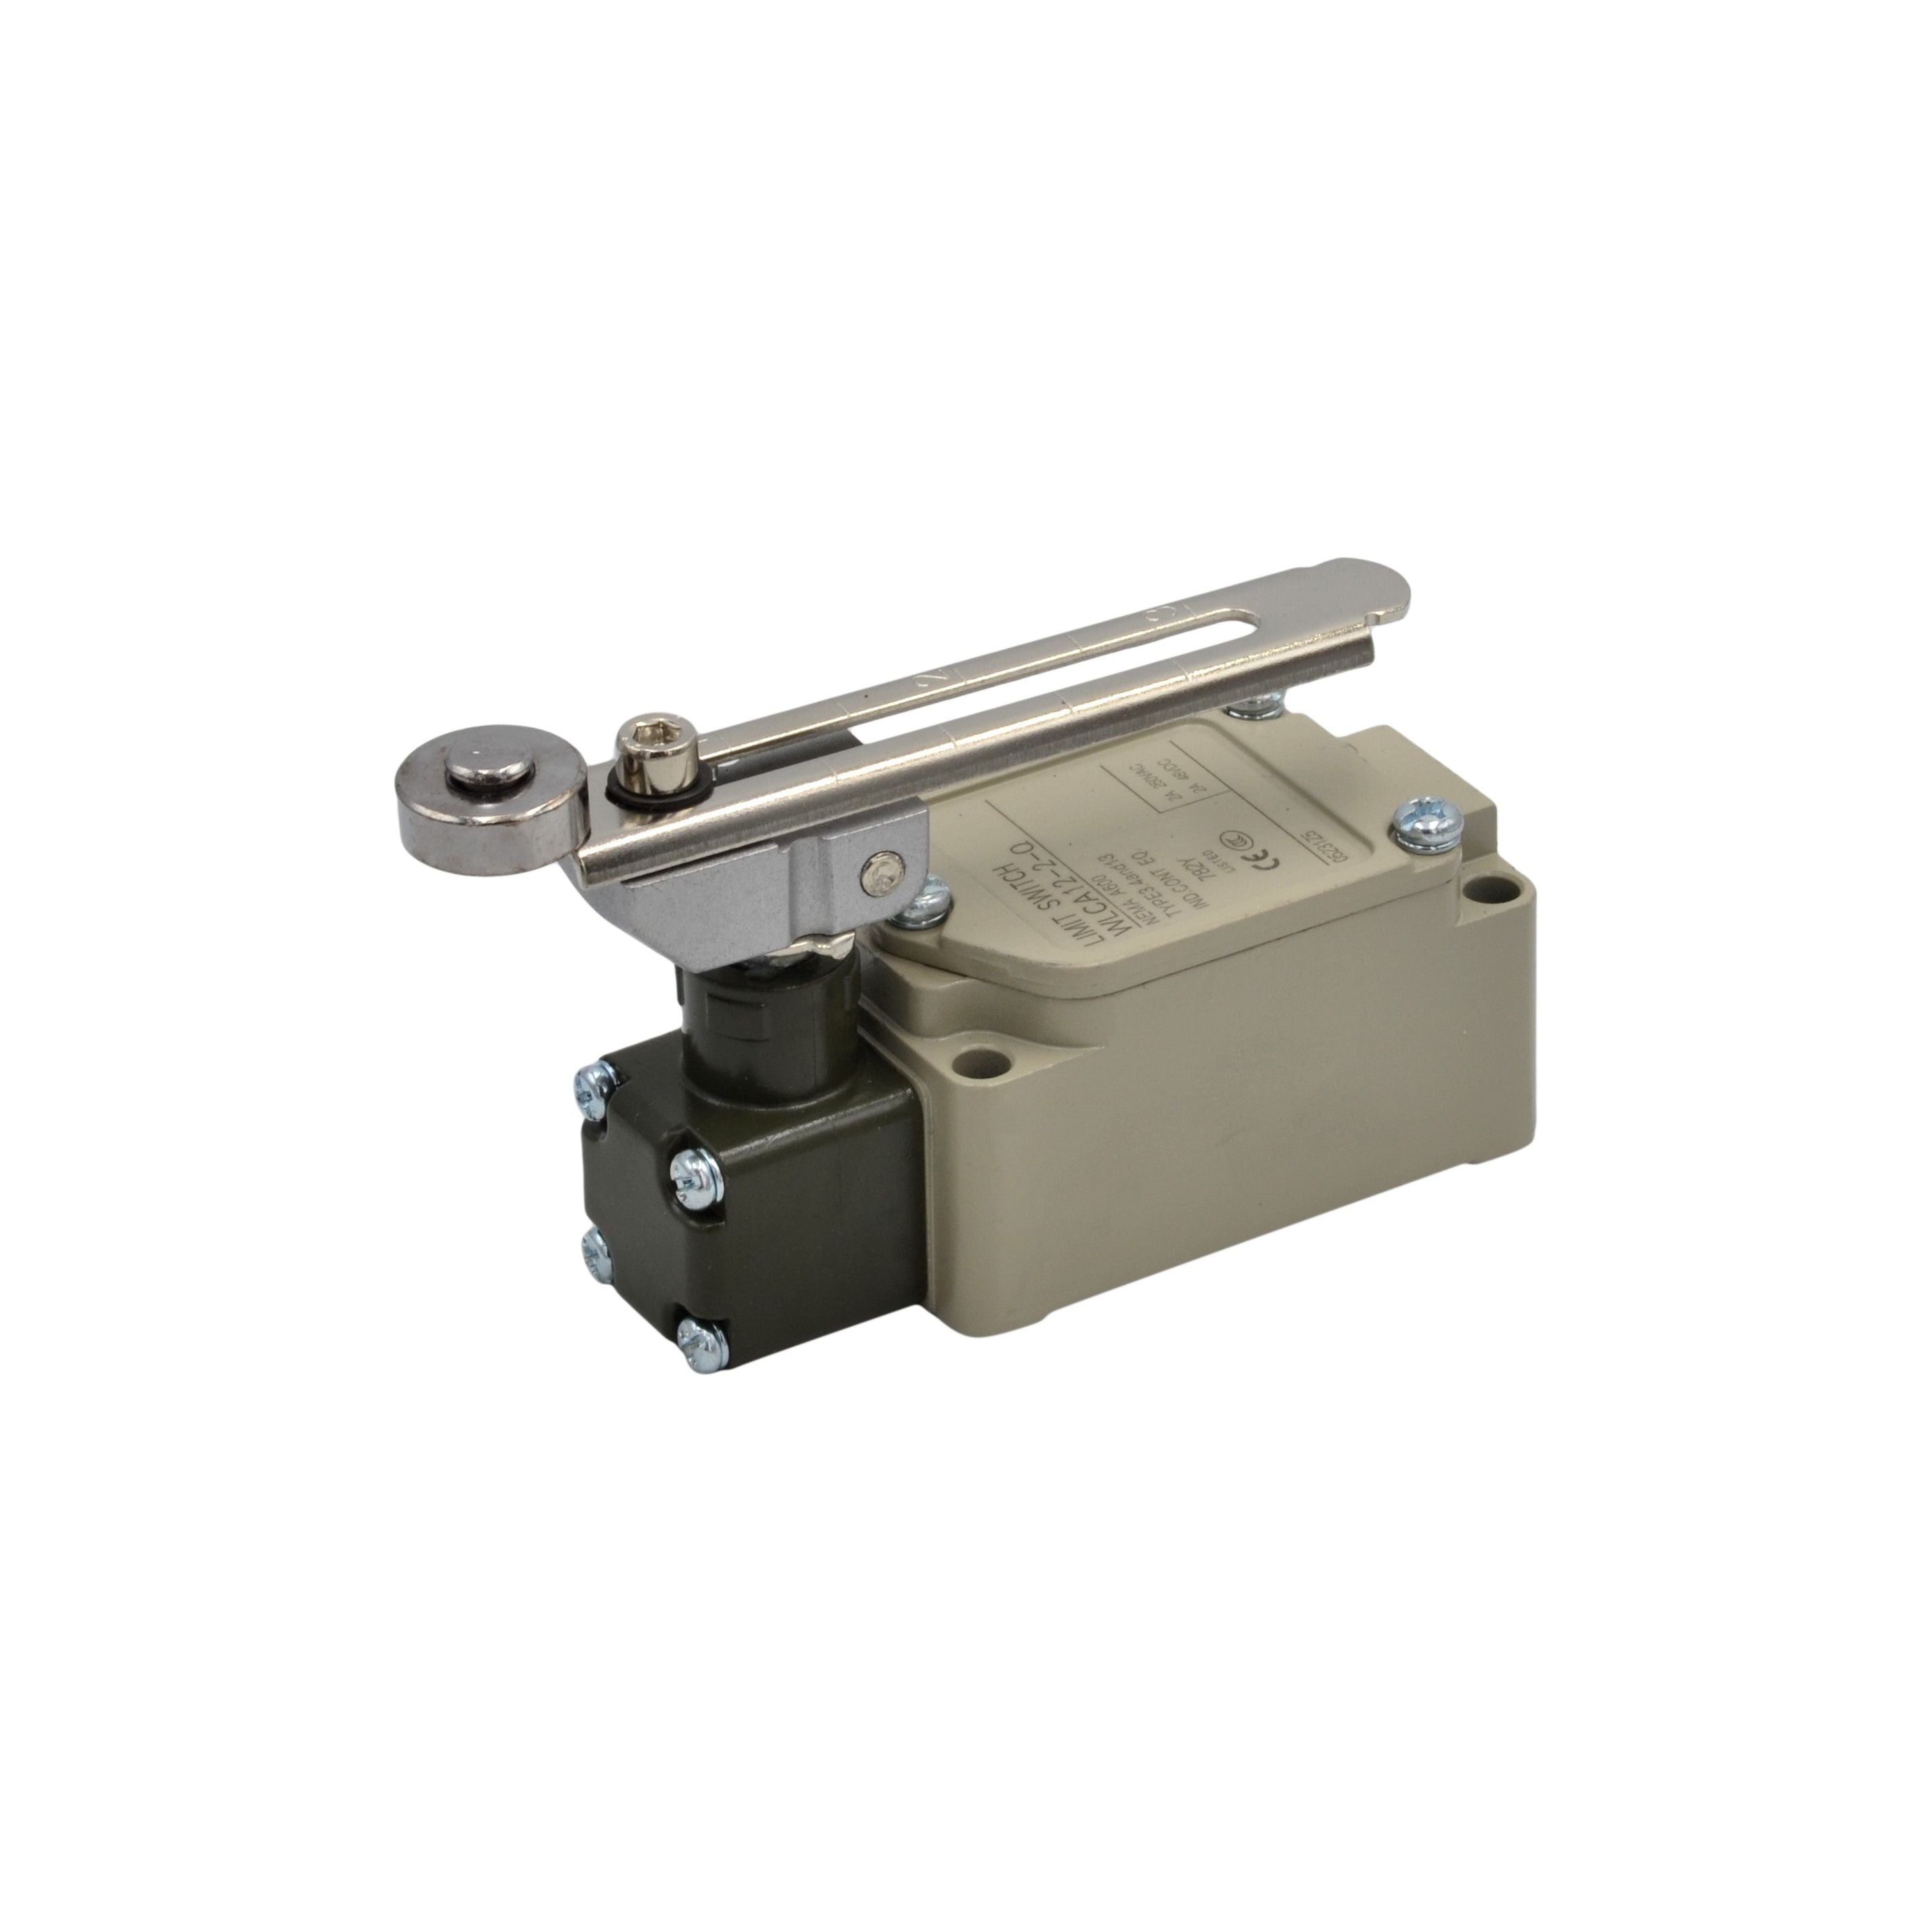 WLCA12-2-Q MicroLimit Switch with Adjustable Roller Arm